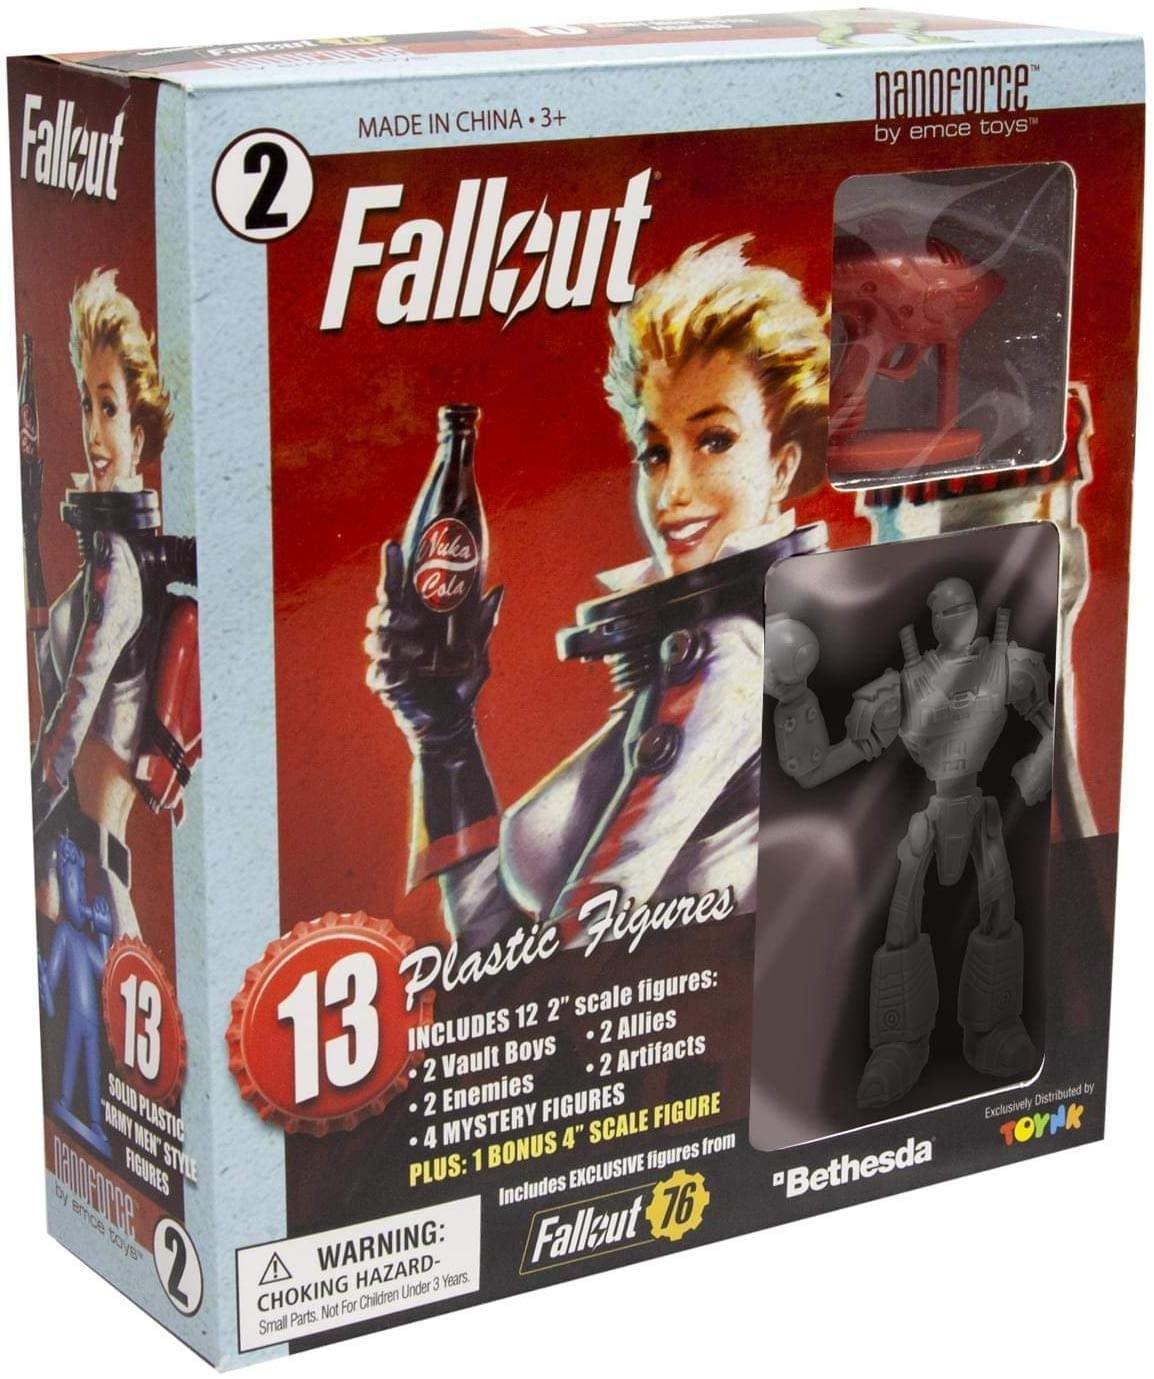 Toynk Fallout Nanoforce Army Builder Figure Collection Boxed Series 1 Volume Figure